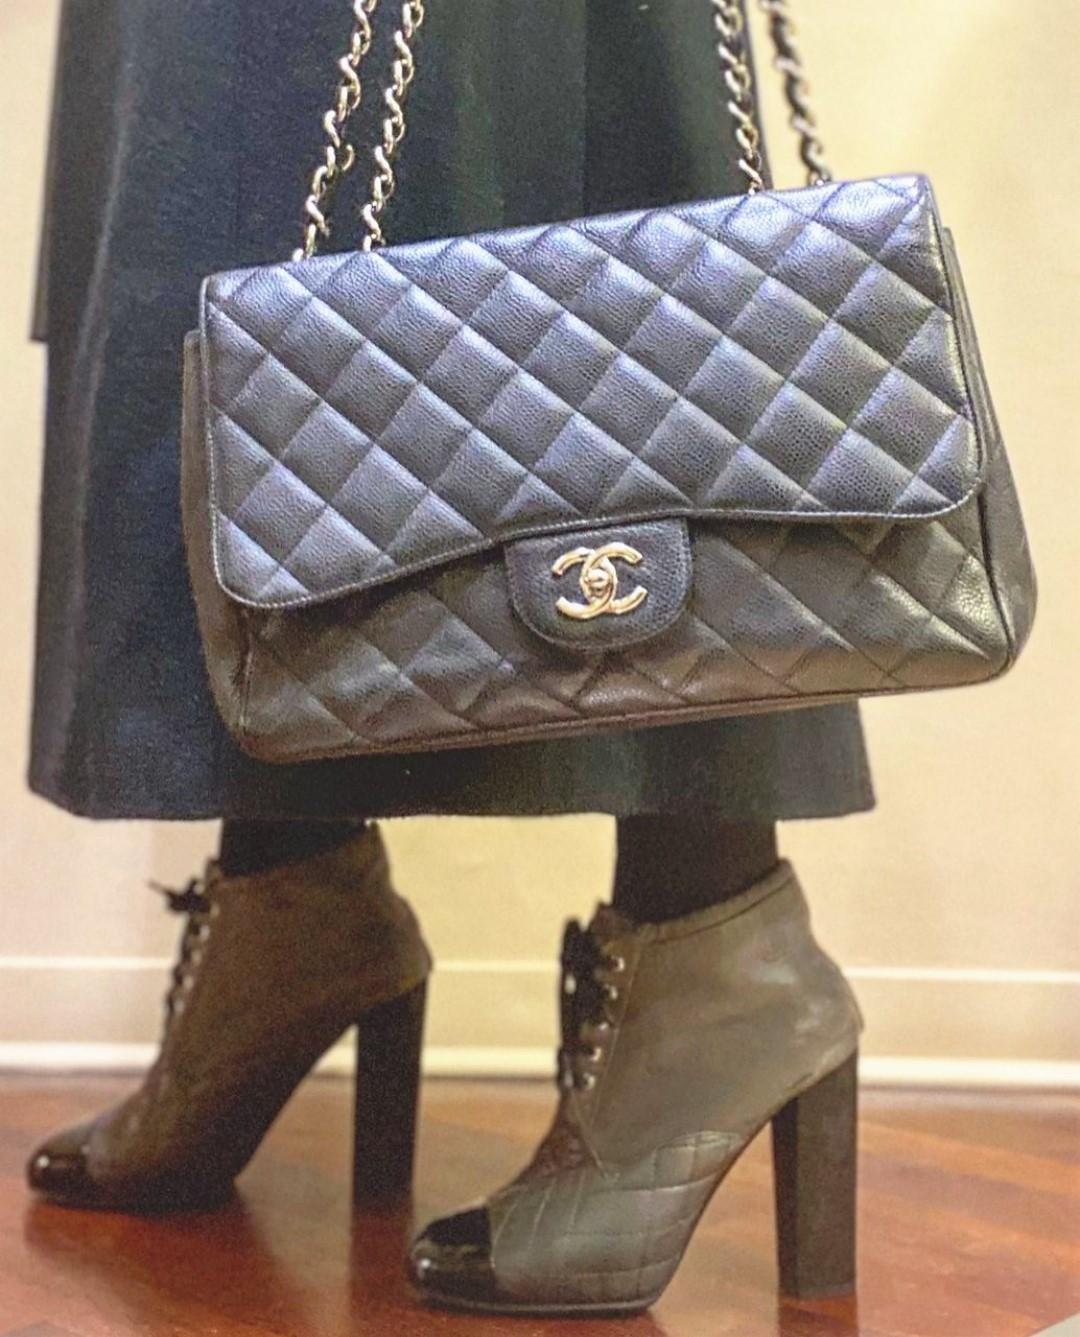 Women's Chanel Black Large Classic Bag For Sale